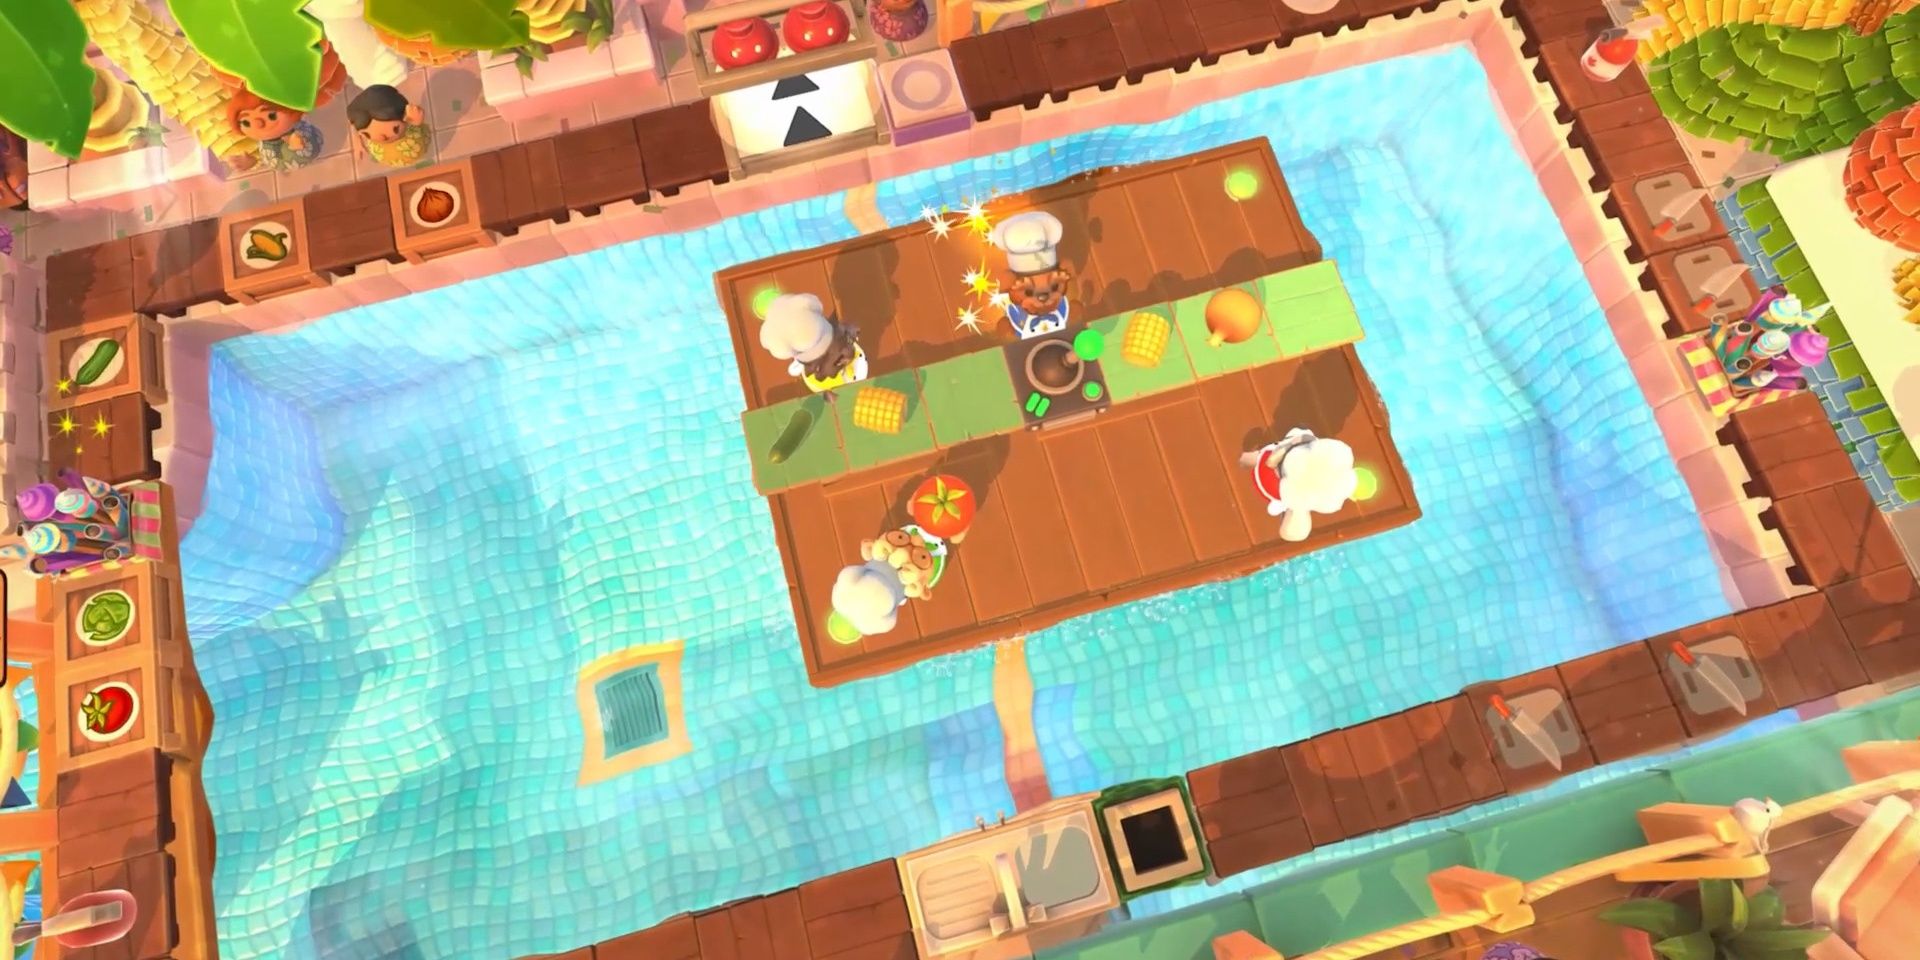 Four cooks standing on a pool raft with some cooking supplies in Overcooked 2